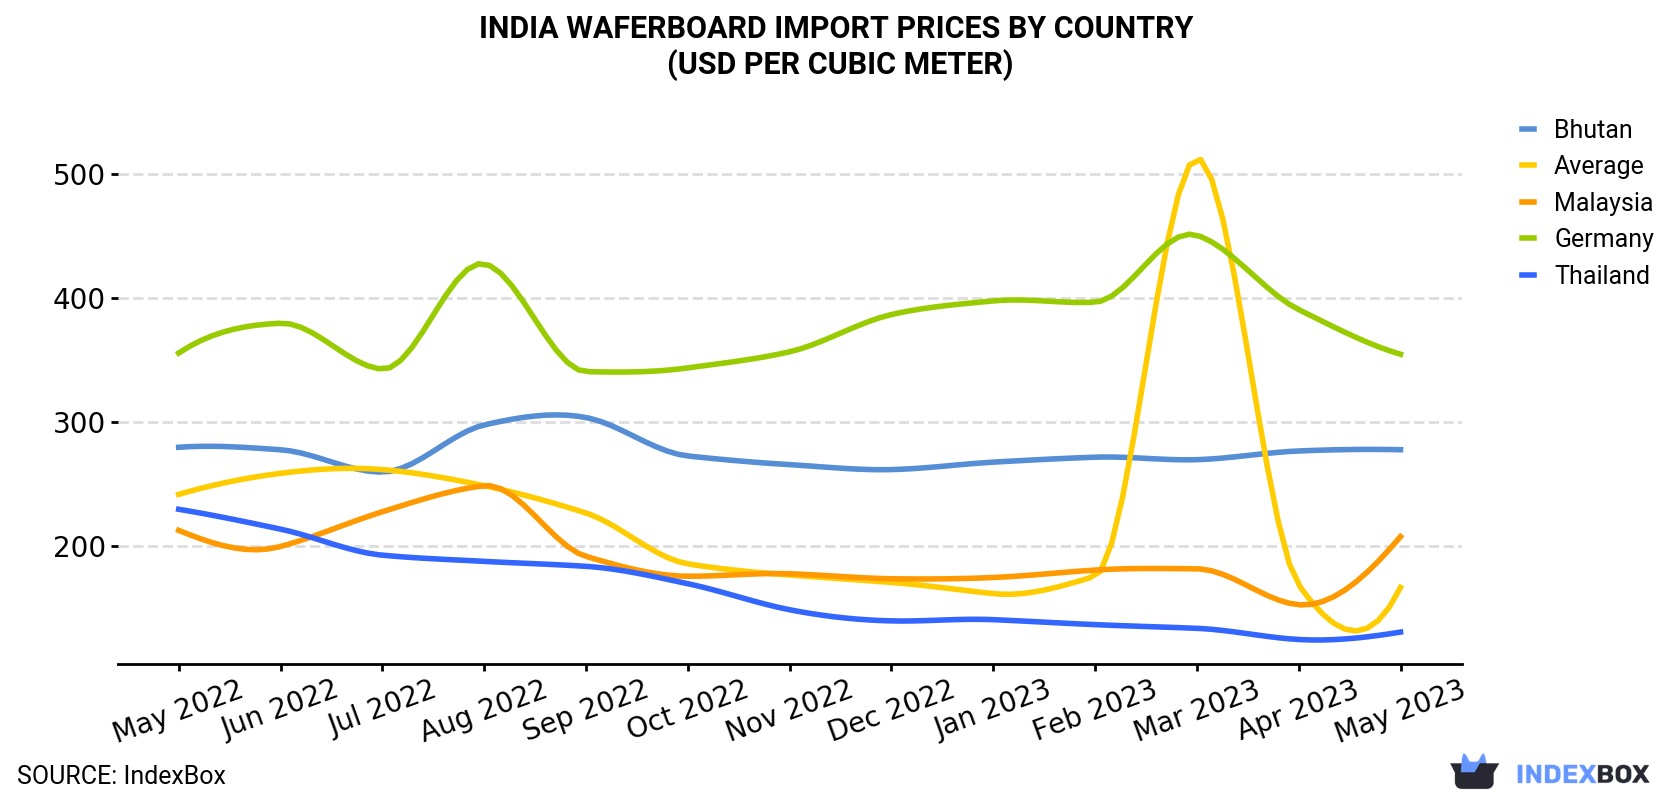 India Waferboard Import Prices By Country (USD Per Cubic Meter)